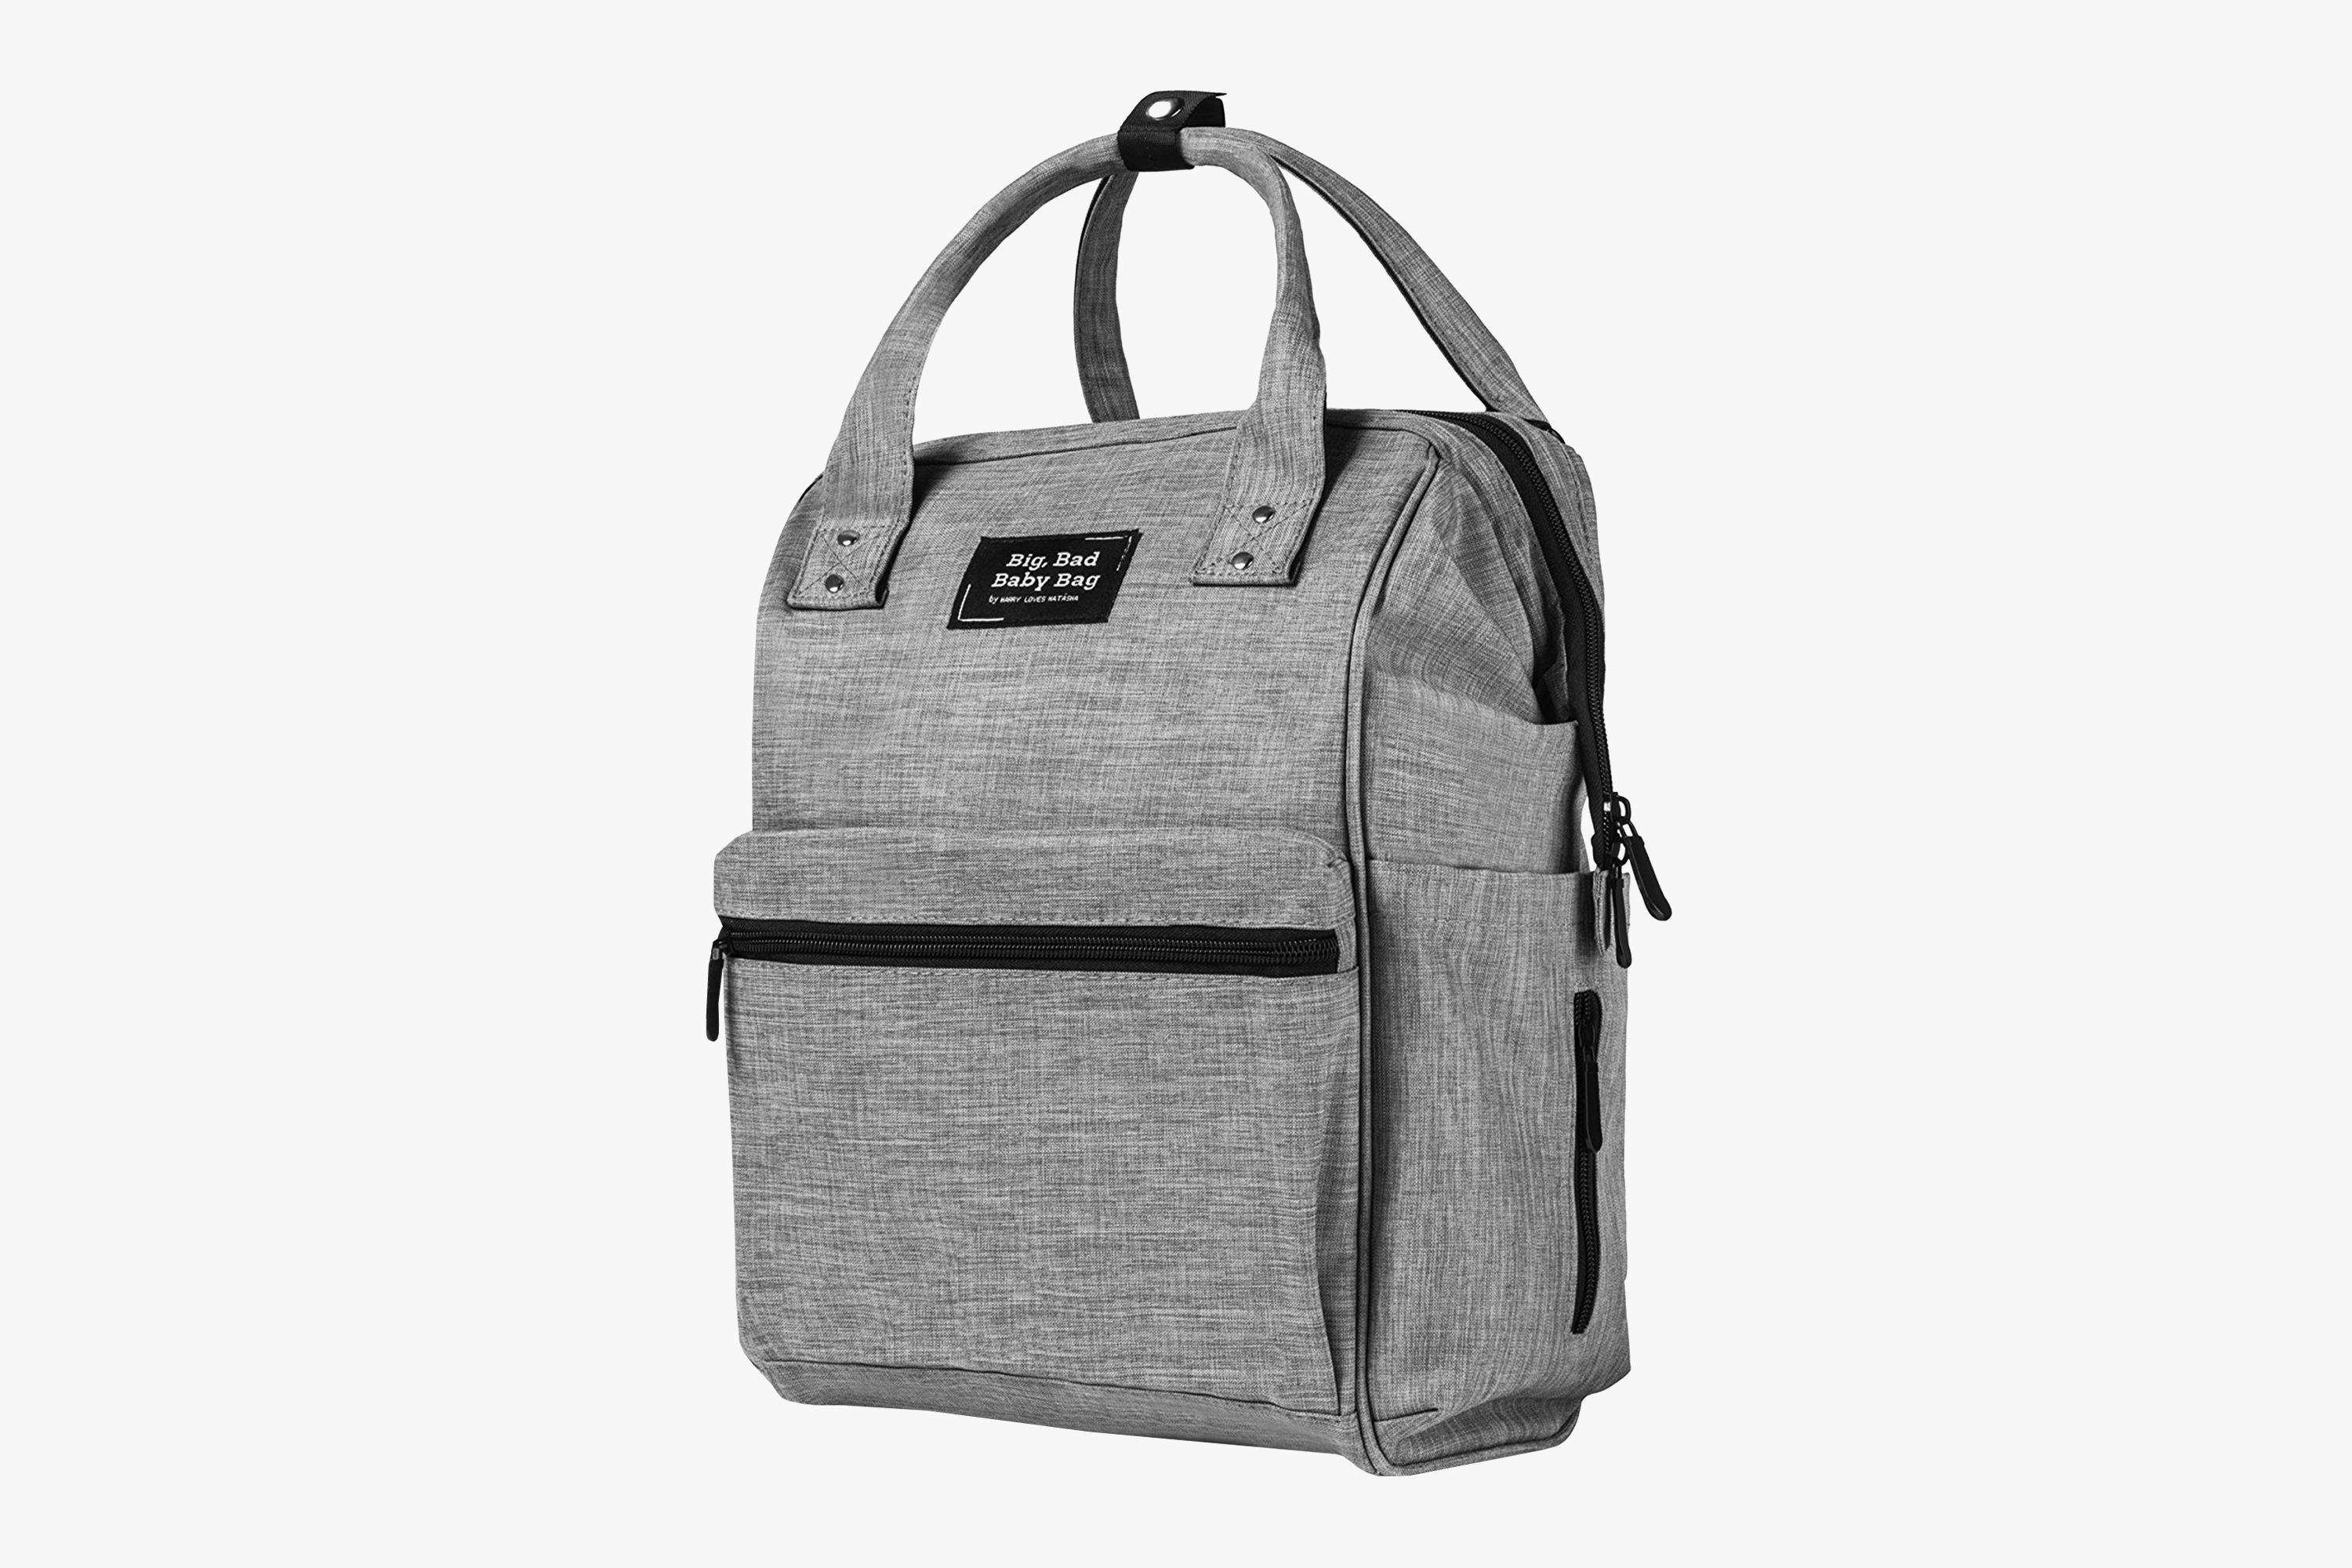 8 Best Diaper Bags to Buy in 2018 - Diaper Bags for Moms and Dads